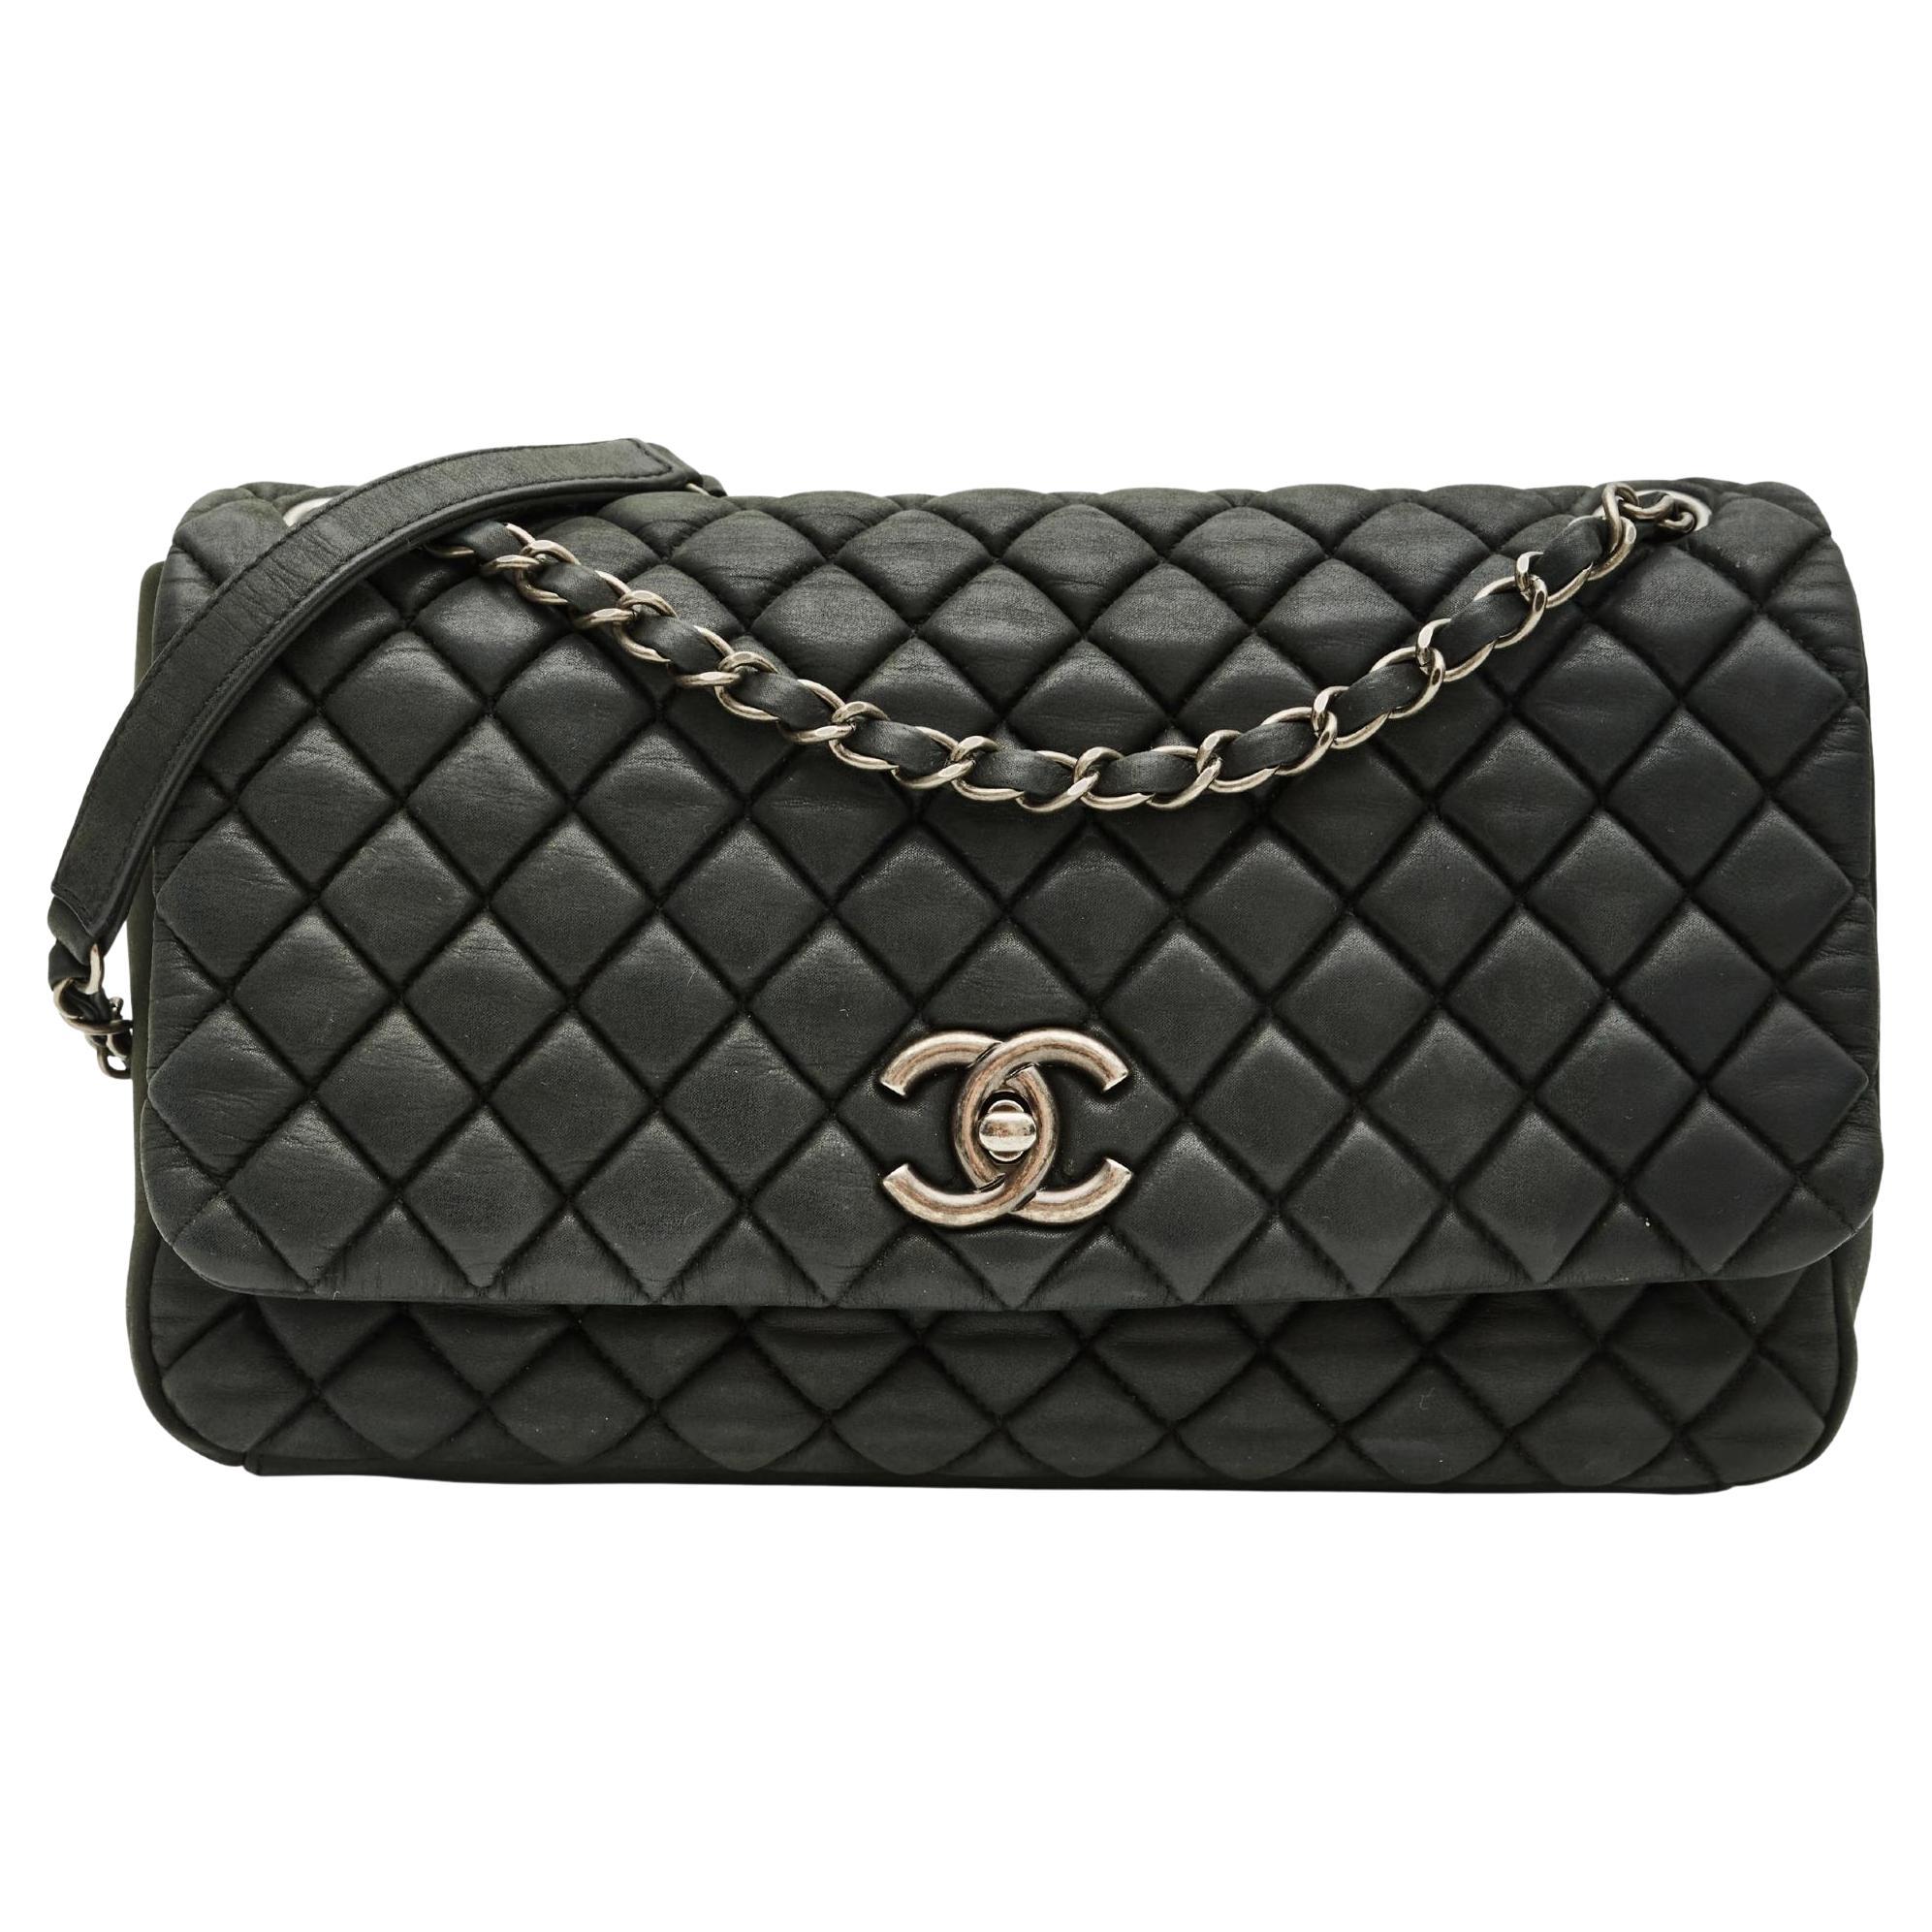 Chanel Iridescent CC Black Calfskin Quilted Large Bubble Flap Bag (2012) For Sale